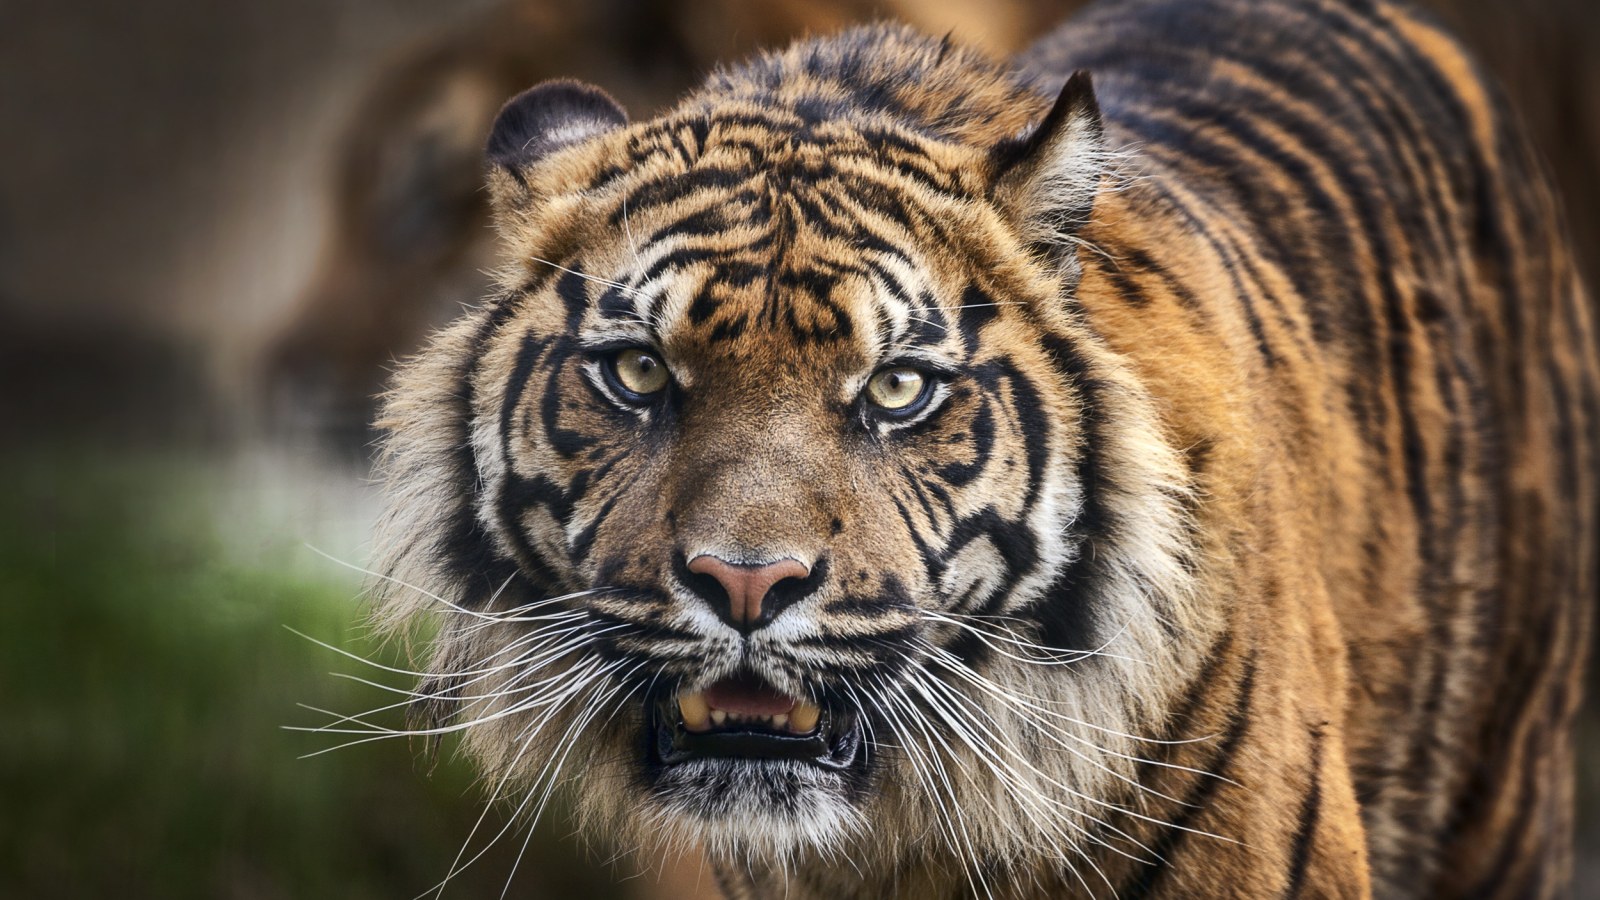 Bengal Tiger Attacks 3 Zookeepers After Faulty Door Left Them in Enclosure With 400lb Male